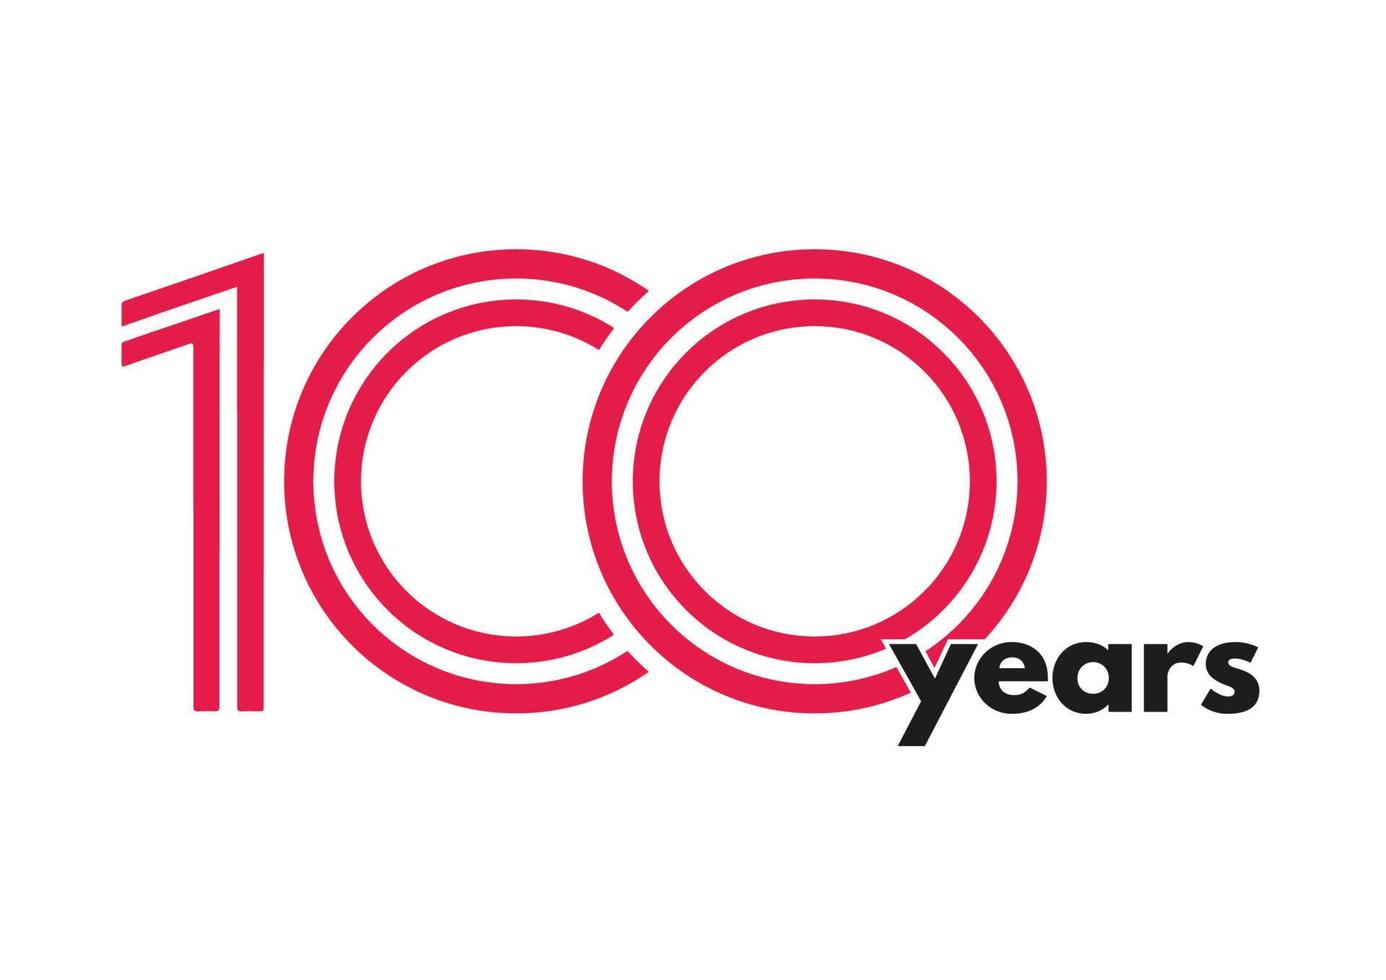 100th year logo and typography vector